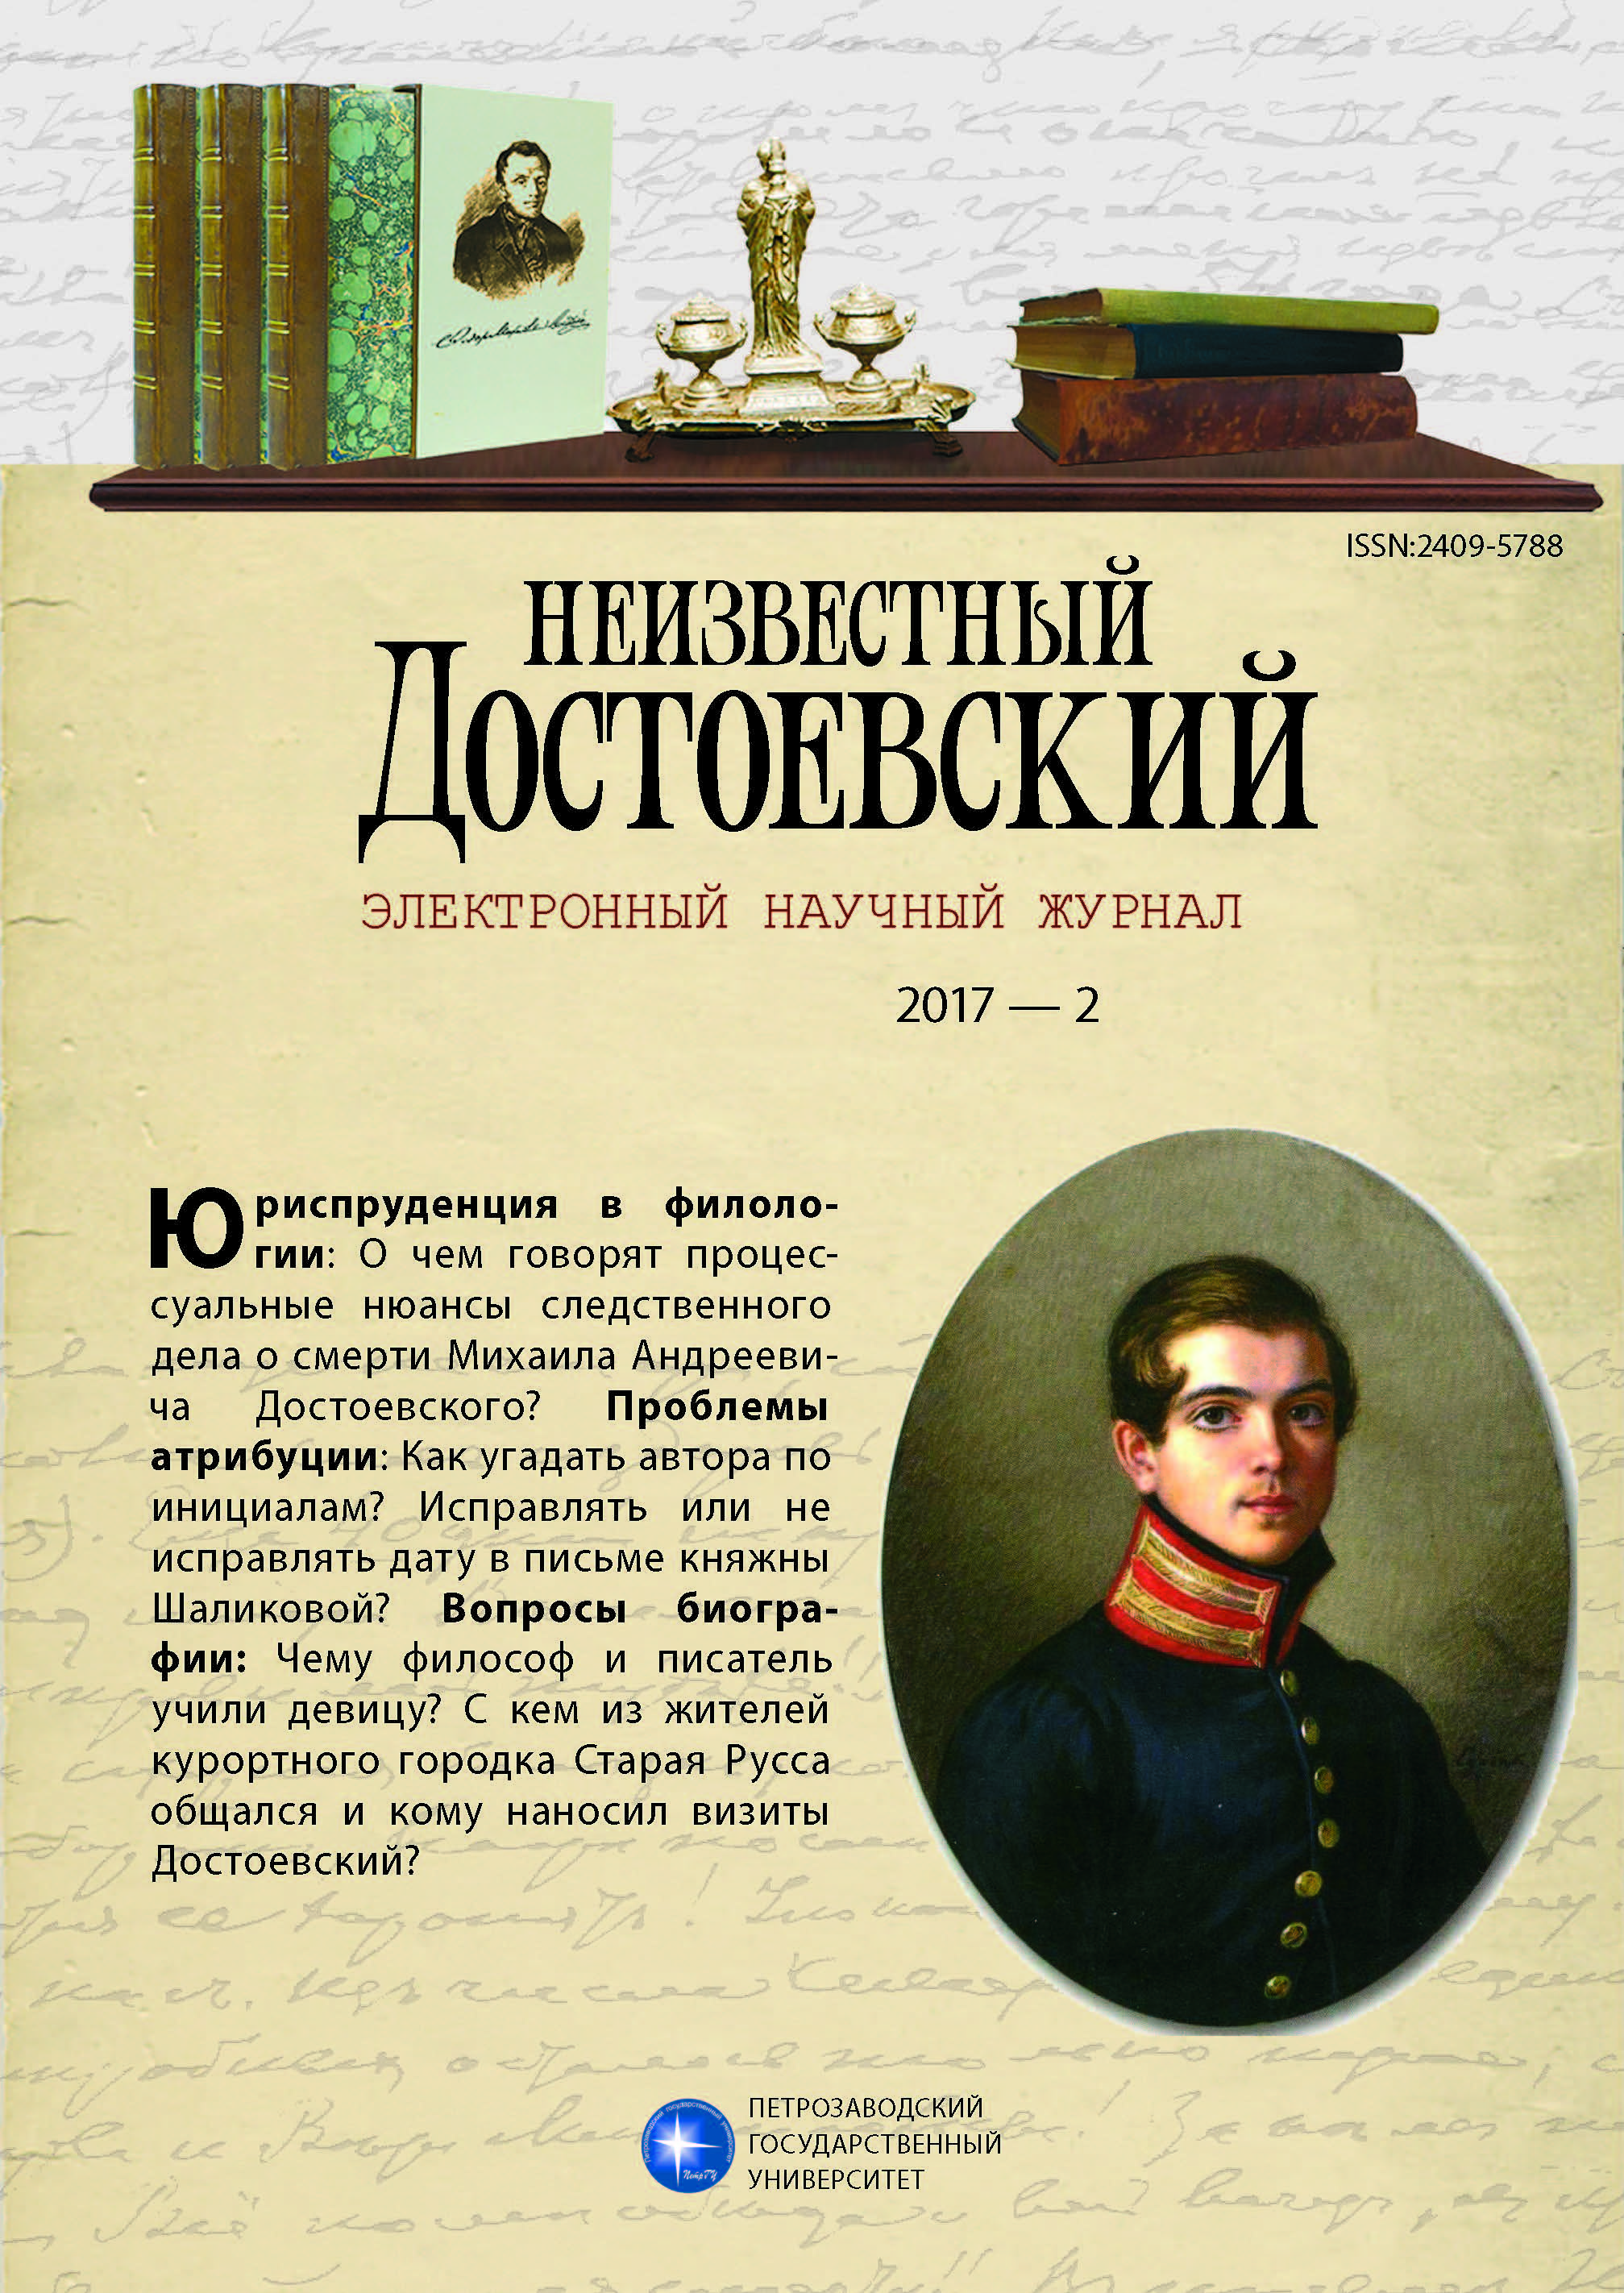 The Case of Mikhail Andreevich Dostoevsky’s Death, or What Did Judges Sweat Away During a Year and a Half Cover Image